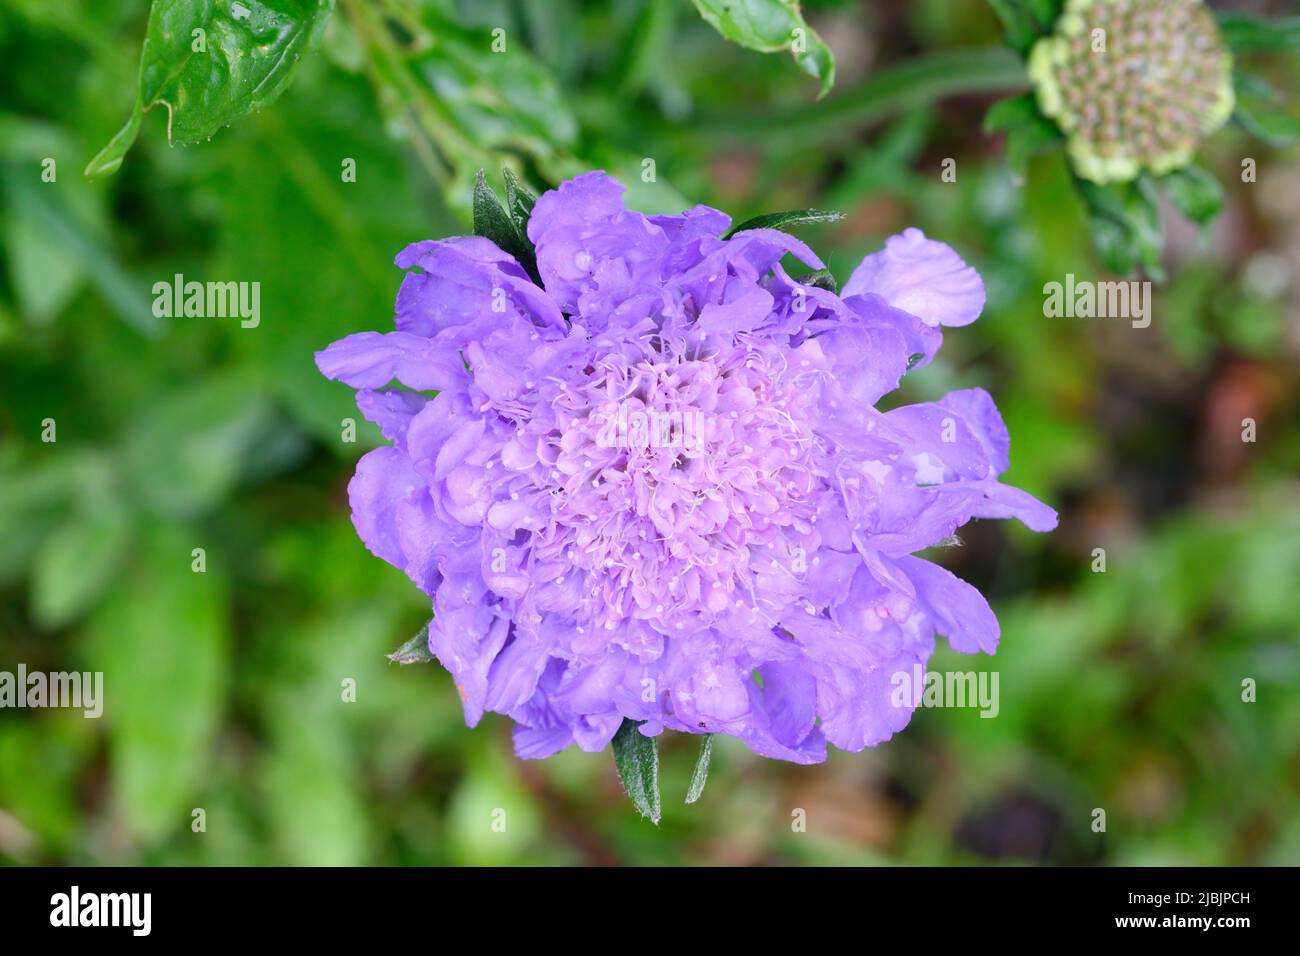 The beautiful intricate flower of a Scabious plant Stock Photo